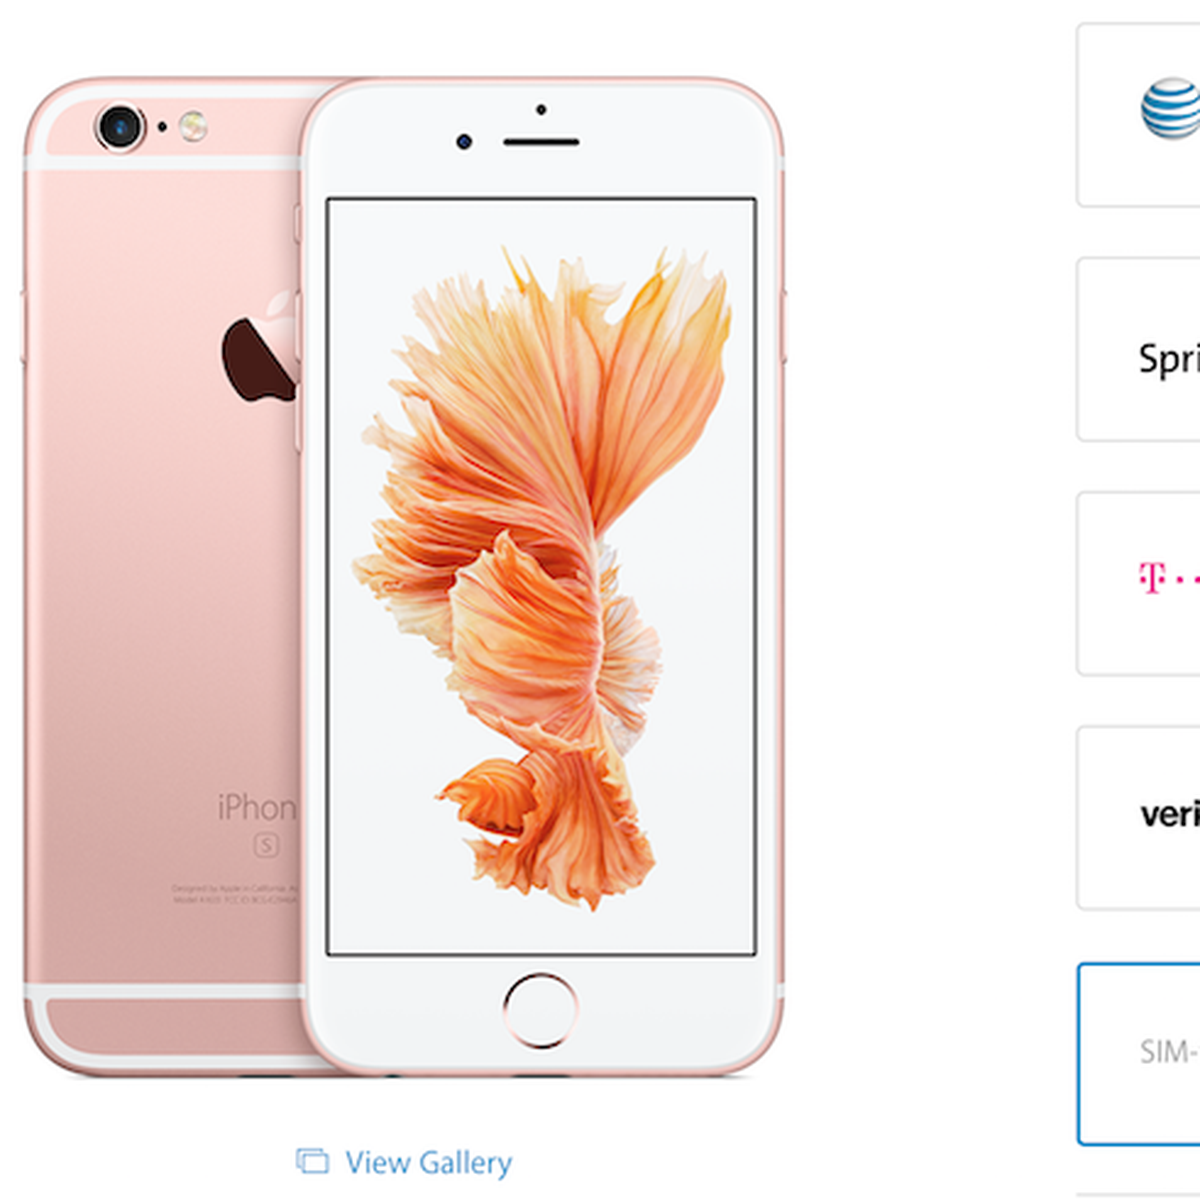 iPhone 6s Now Available SIM-Free in Apple Online Store - MacRumors